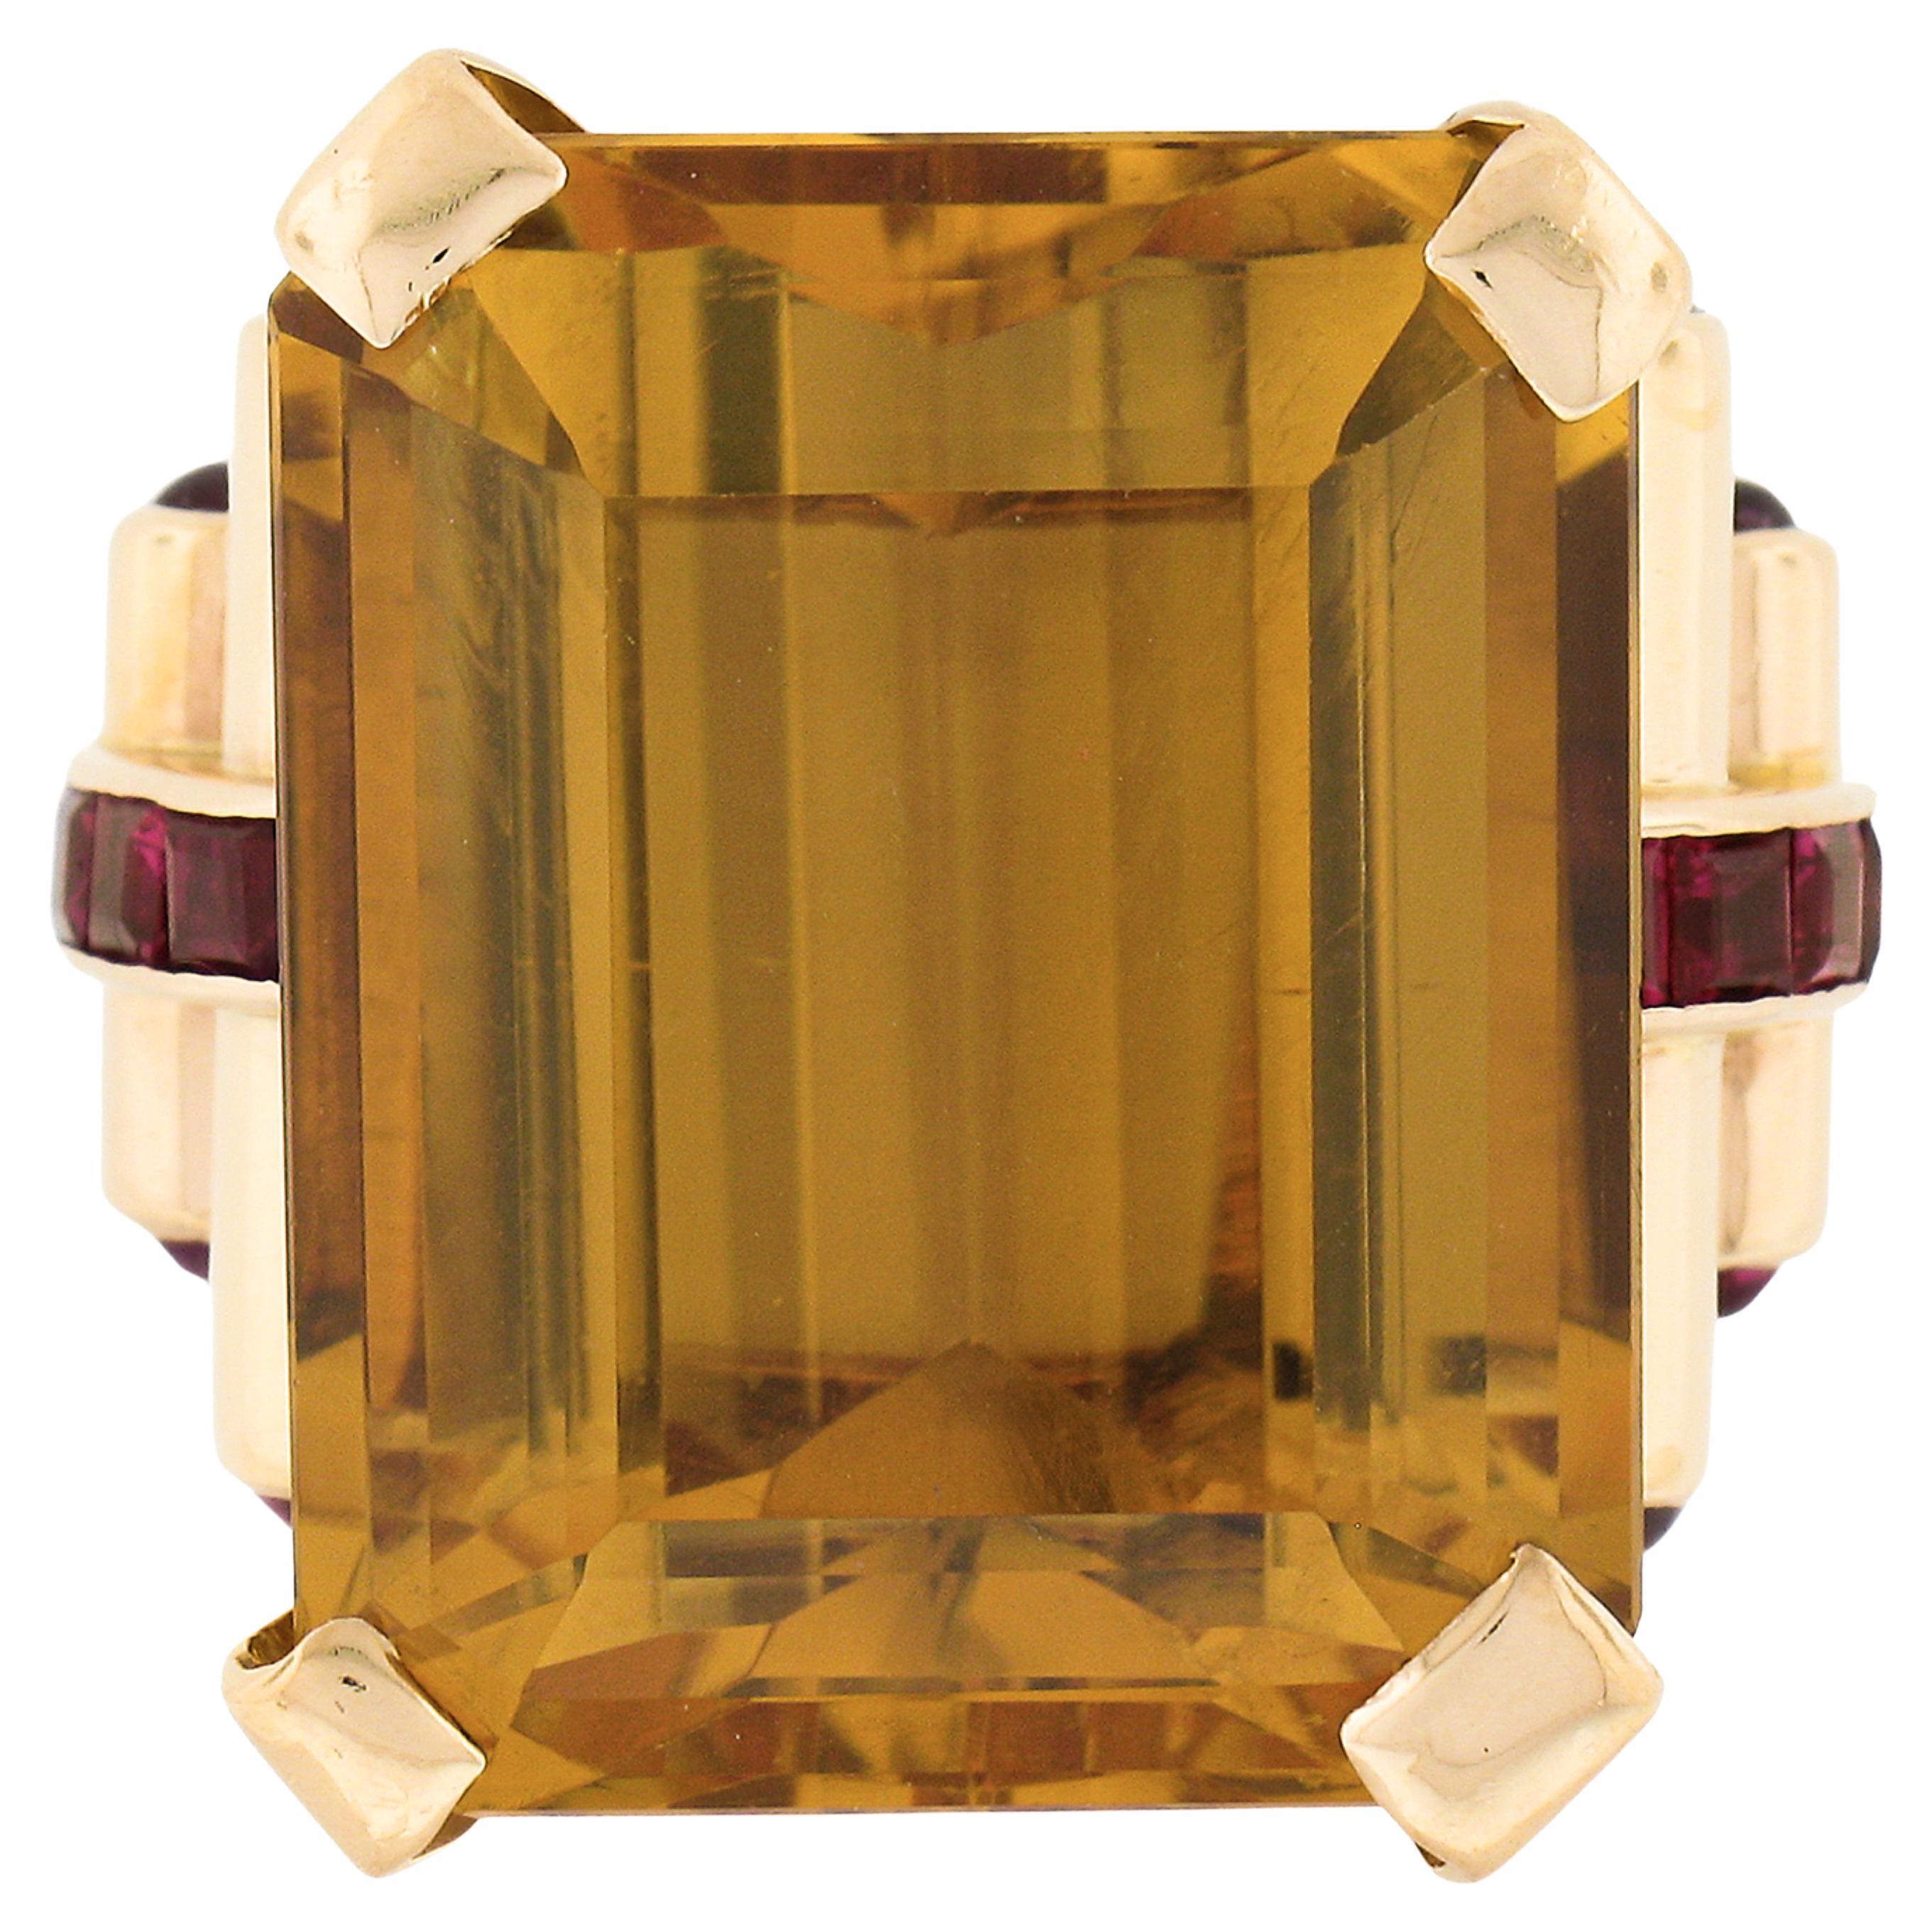 This magnificent vintage statement ring was crafted from solid 14k gold and carries a very large rectangular step cut citrine stone neatly prong set at the center of an open basket setting. The stunning solitaire has an incredible cutting style that